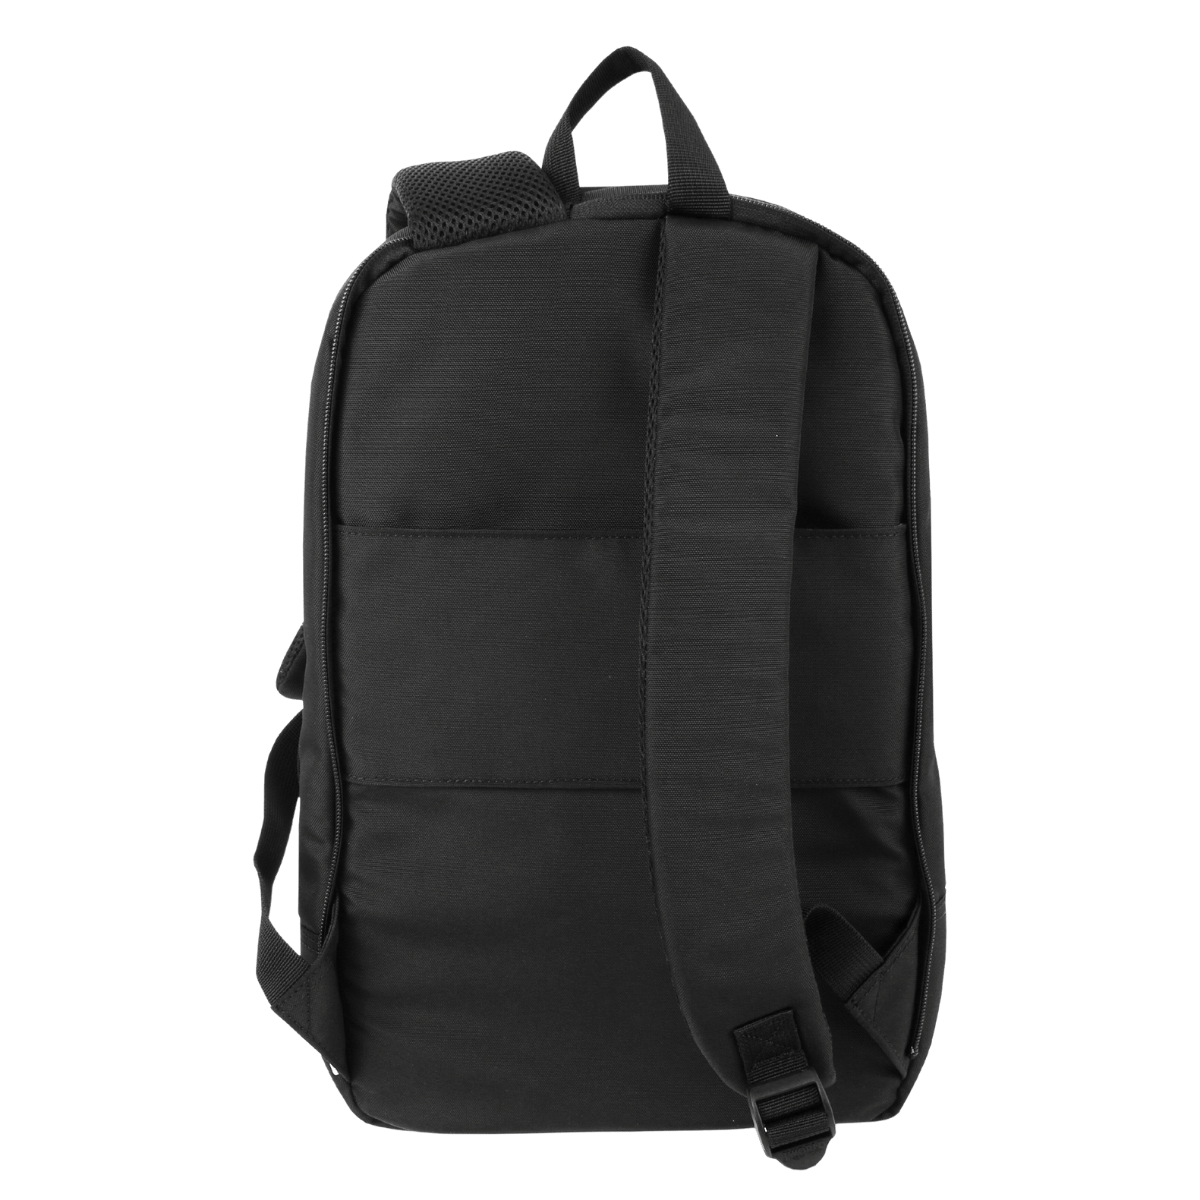 Dustin Laptop Rolling Backpack With Detachable Backpack (20 Inch) - JWorldstore